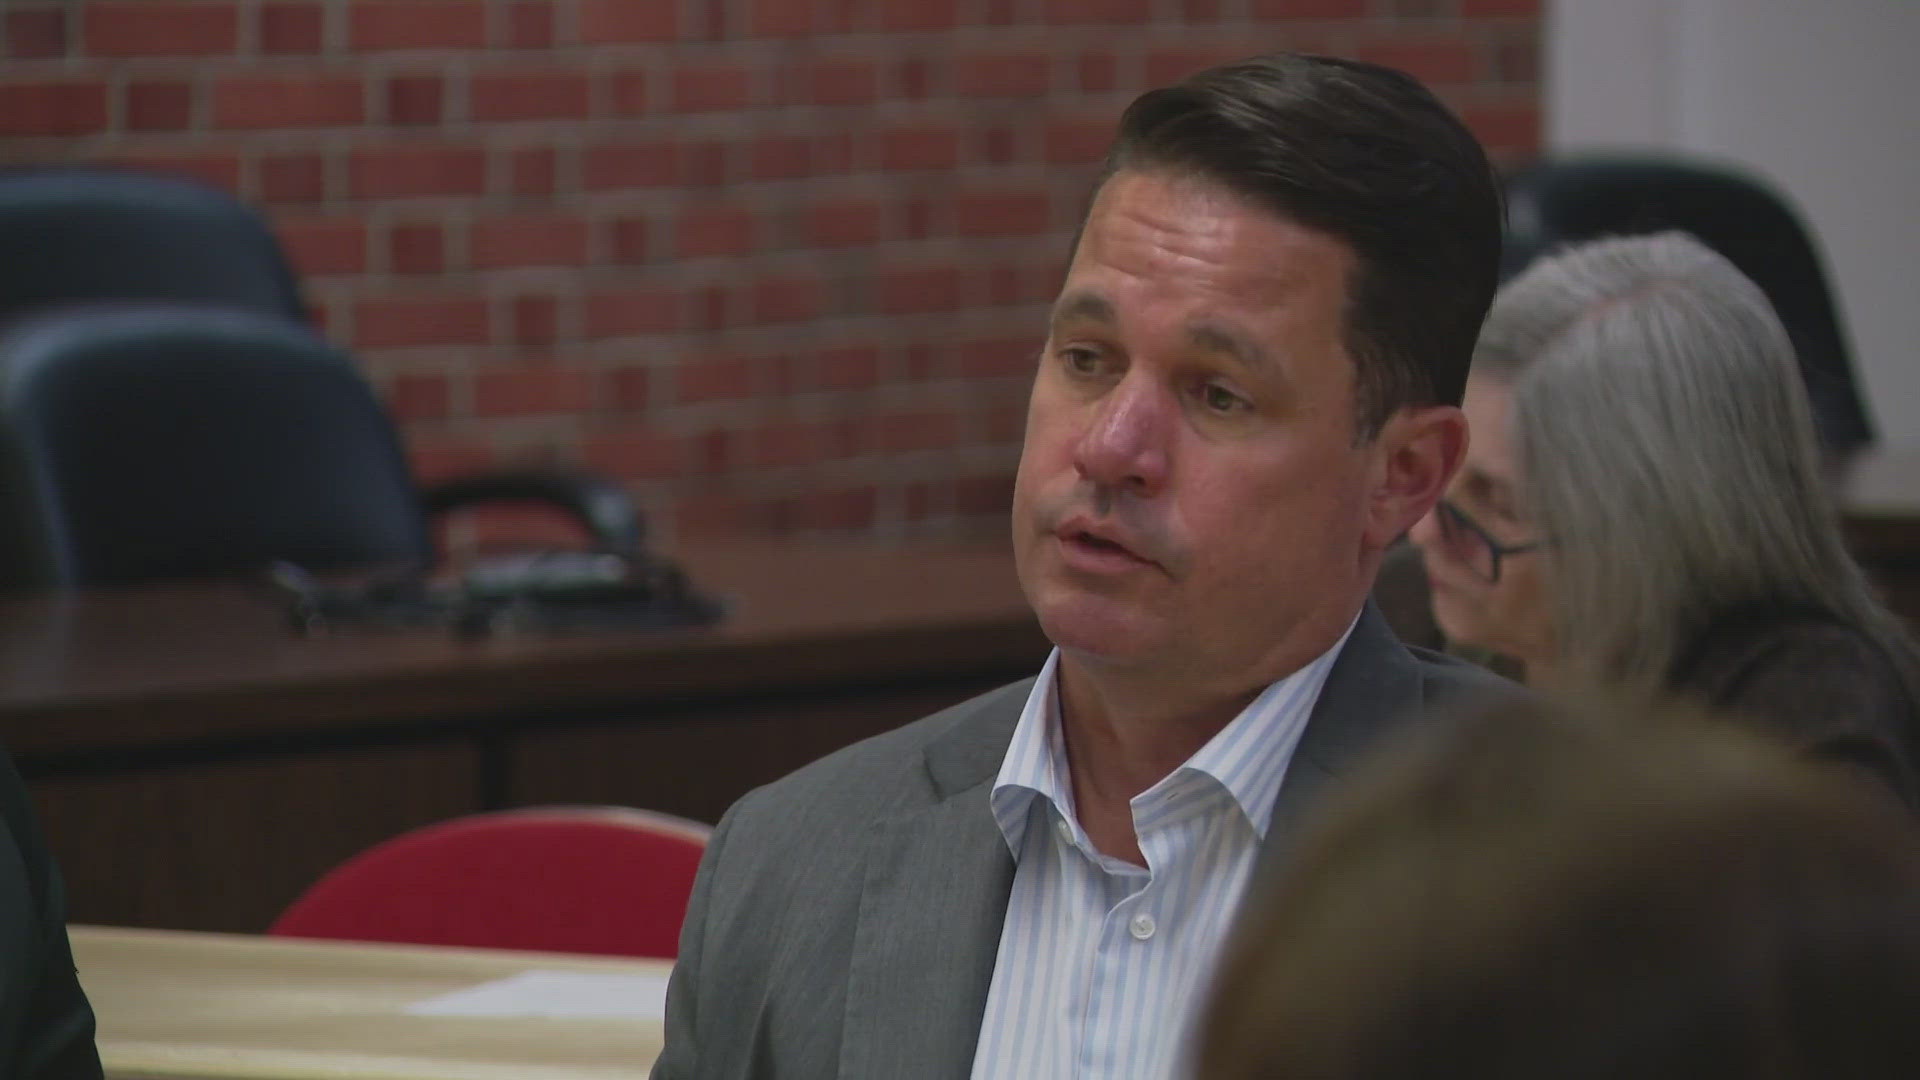 Superintendent Marty Pollio said there were a few "erroneous assertions" but overall, said "JCPS leaderships agrees with most of the findings."